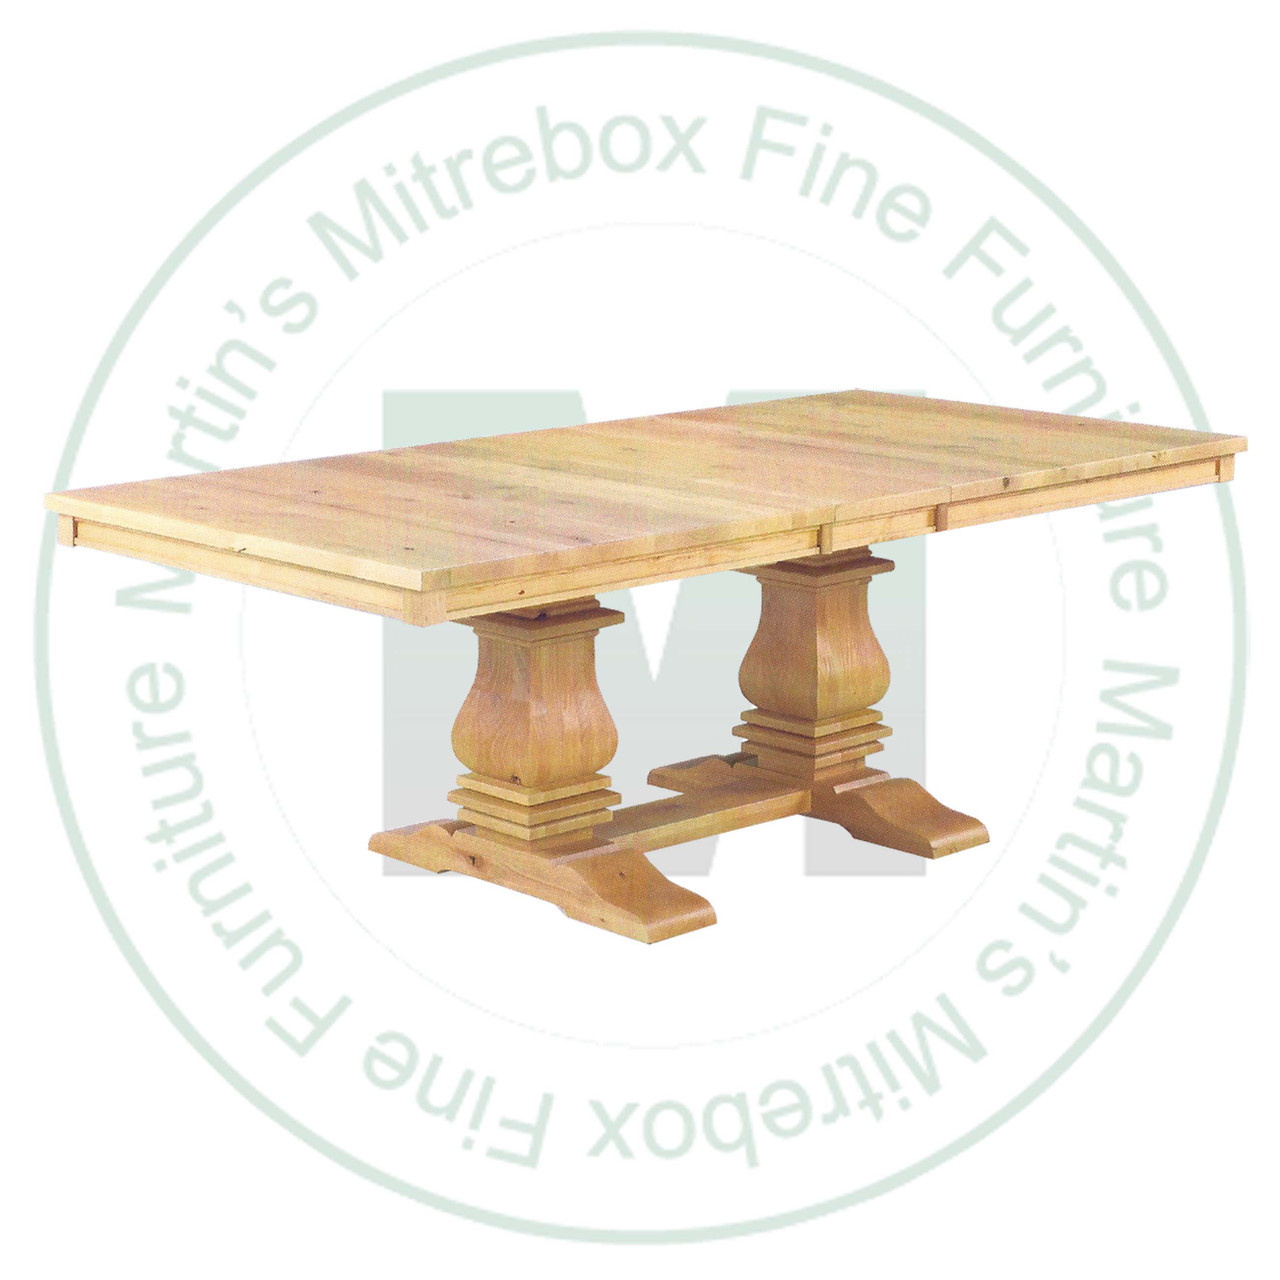 Wormy Maple Mediterranean Solid Top Pedestal Table 42''D x 108''W x 30''H. Table Has 1.25'' Thick Top